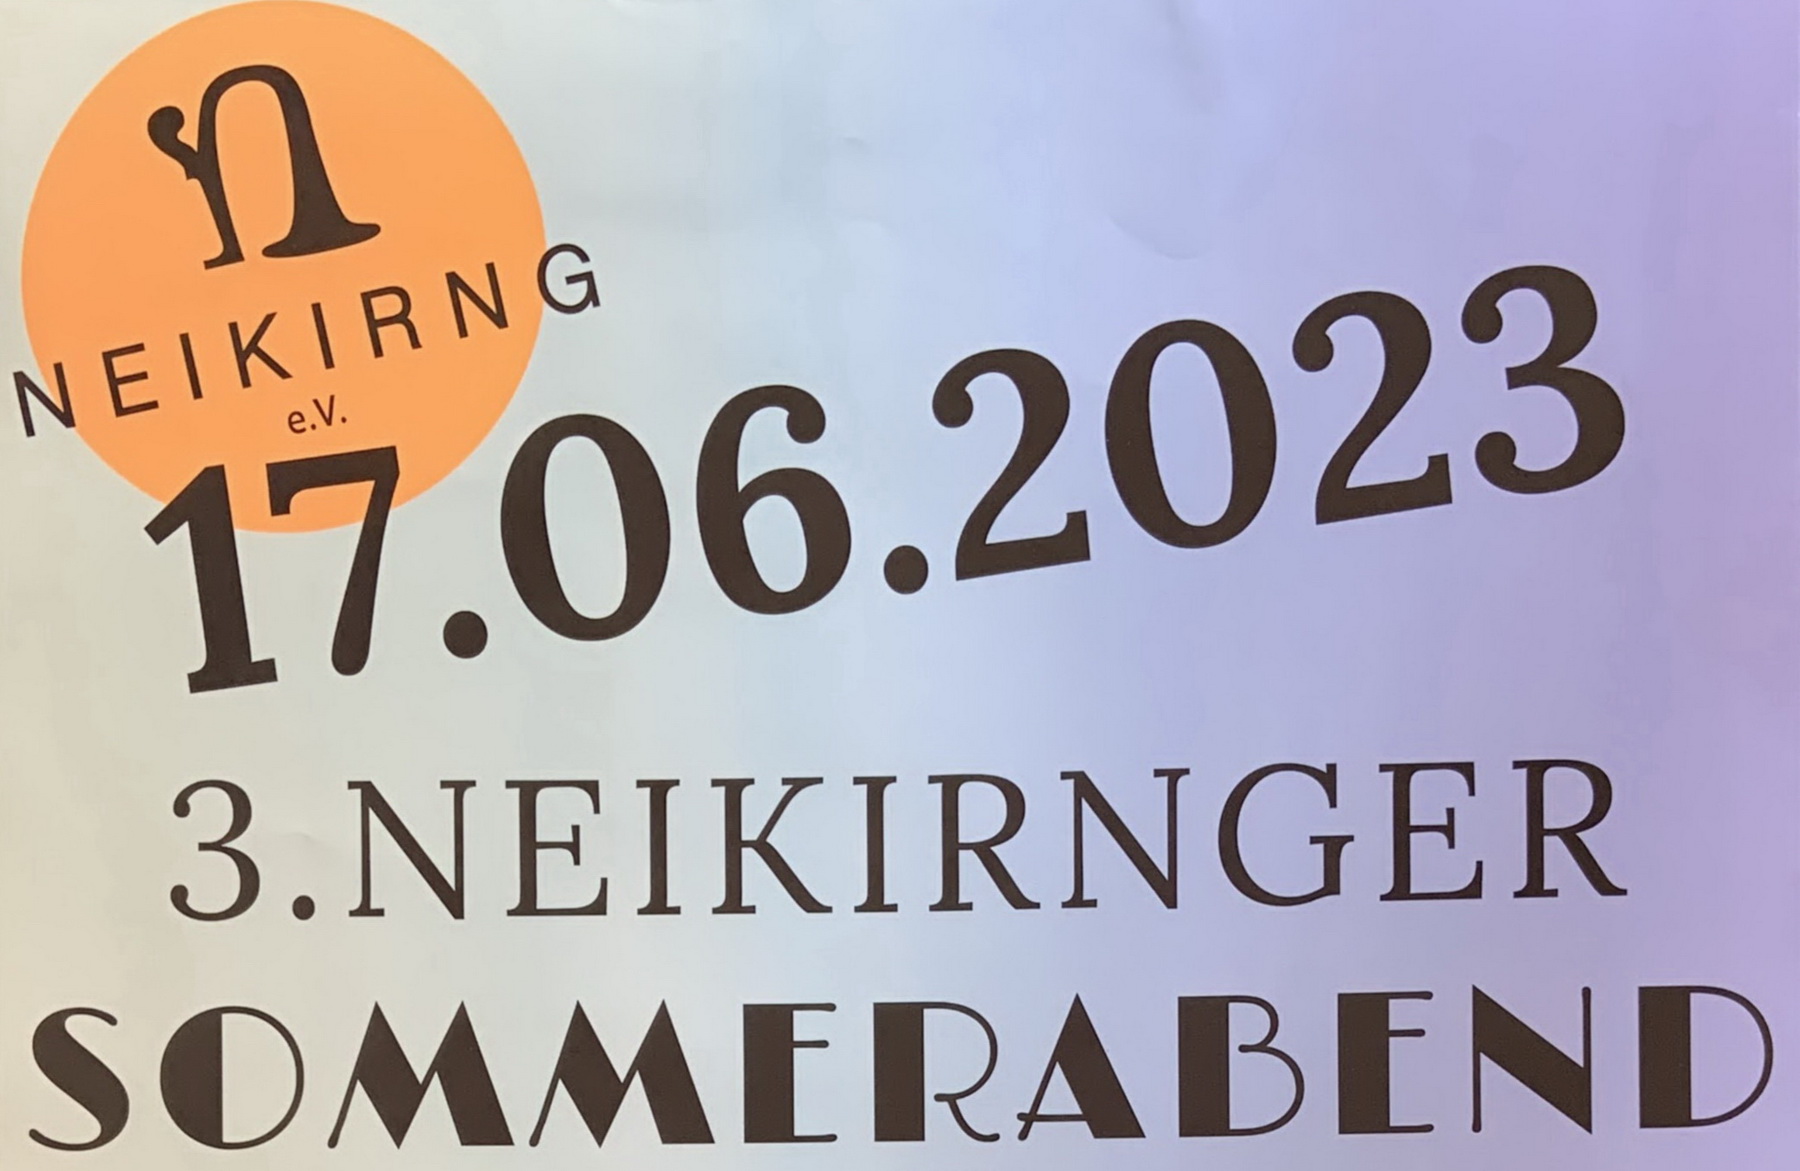 You are currently viewing 17.06.23 / 3. Neikirnger Sommerabend